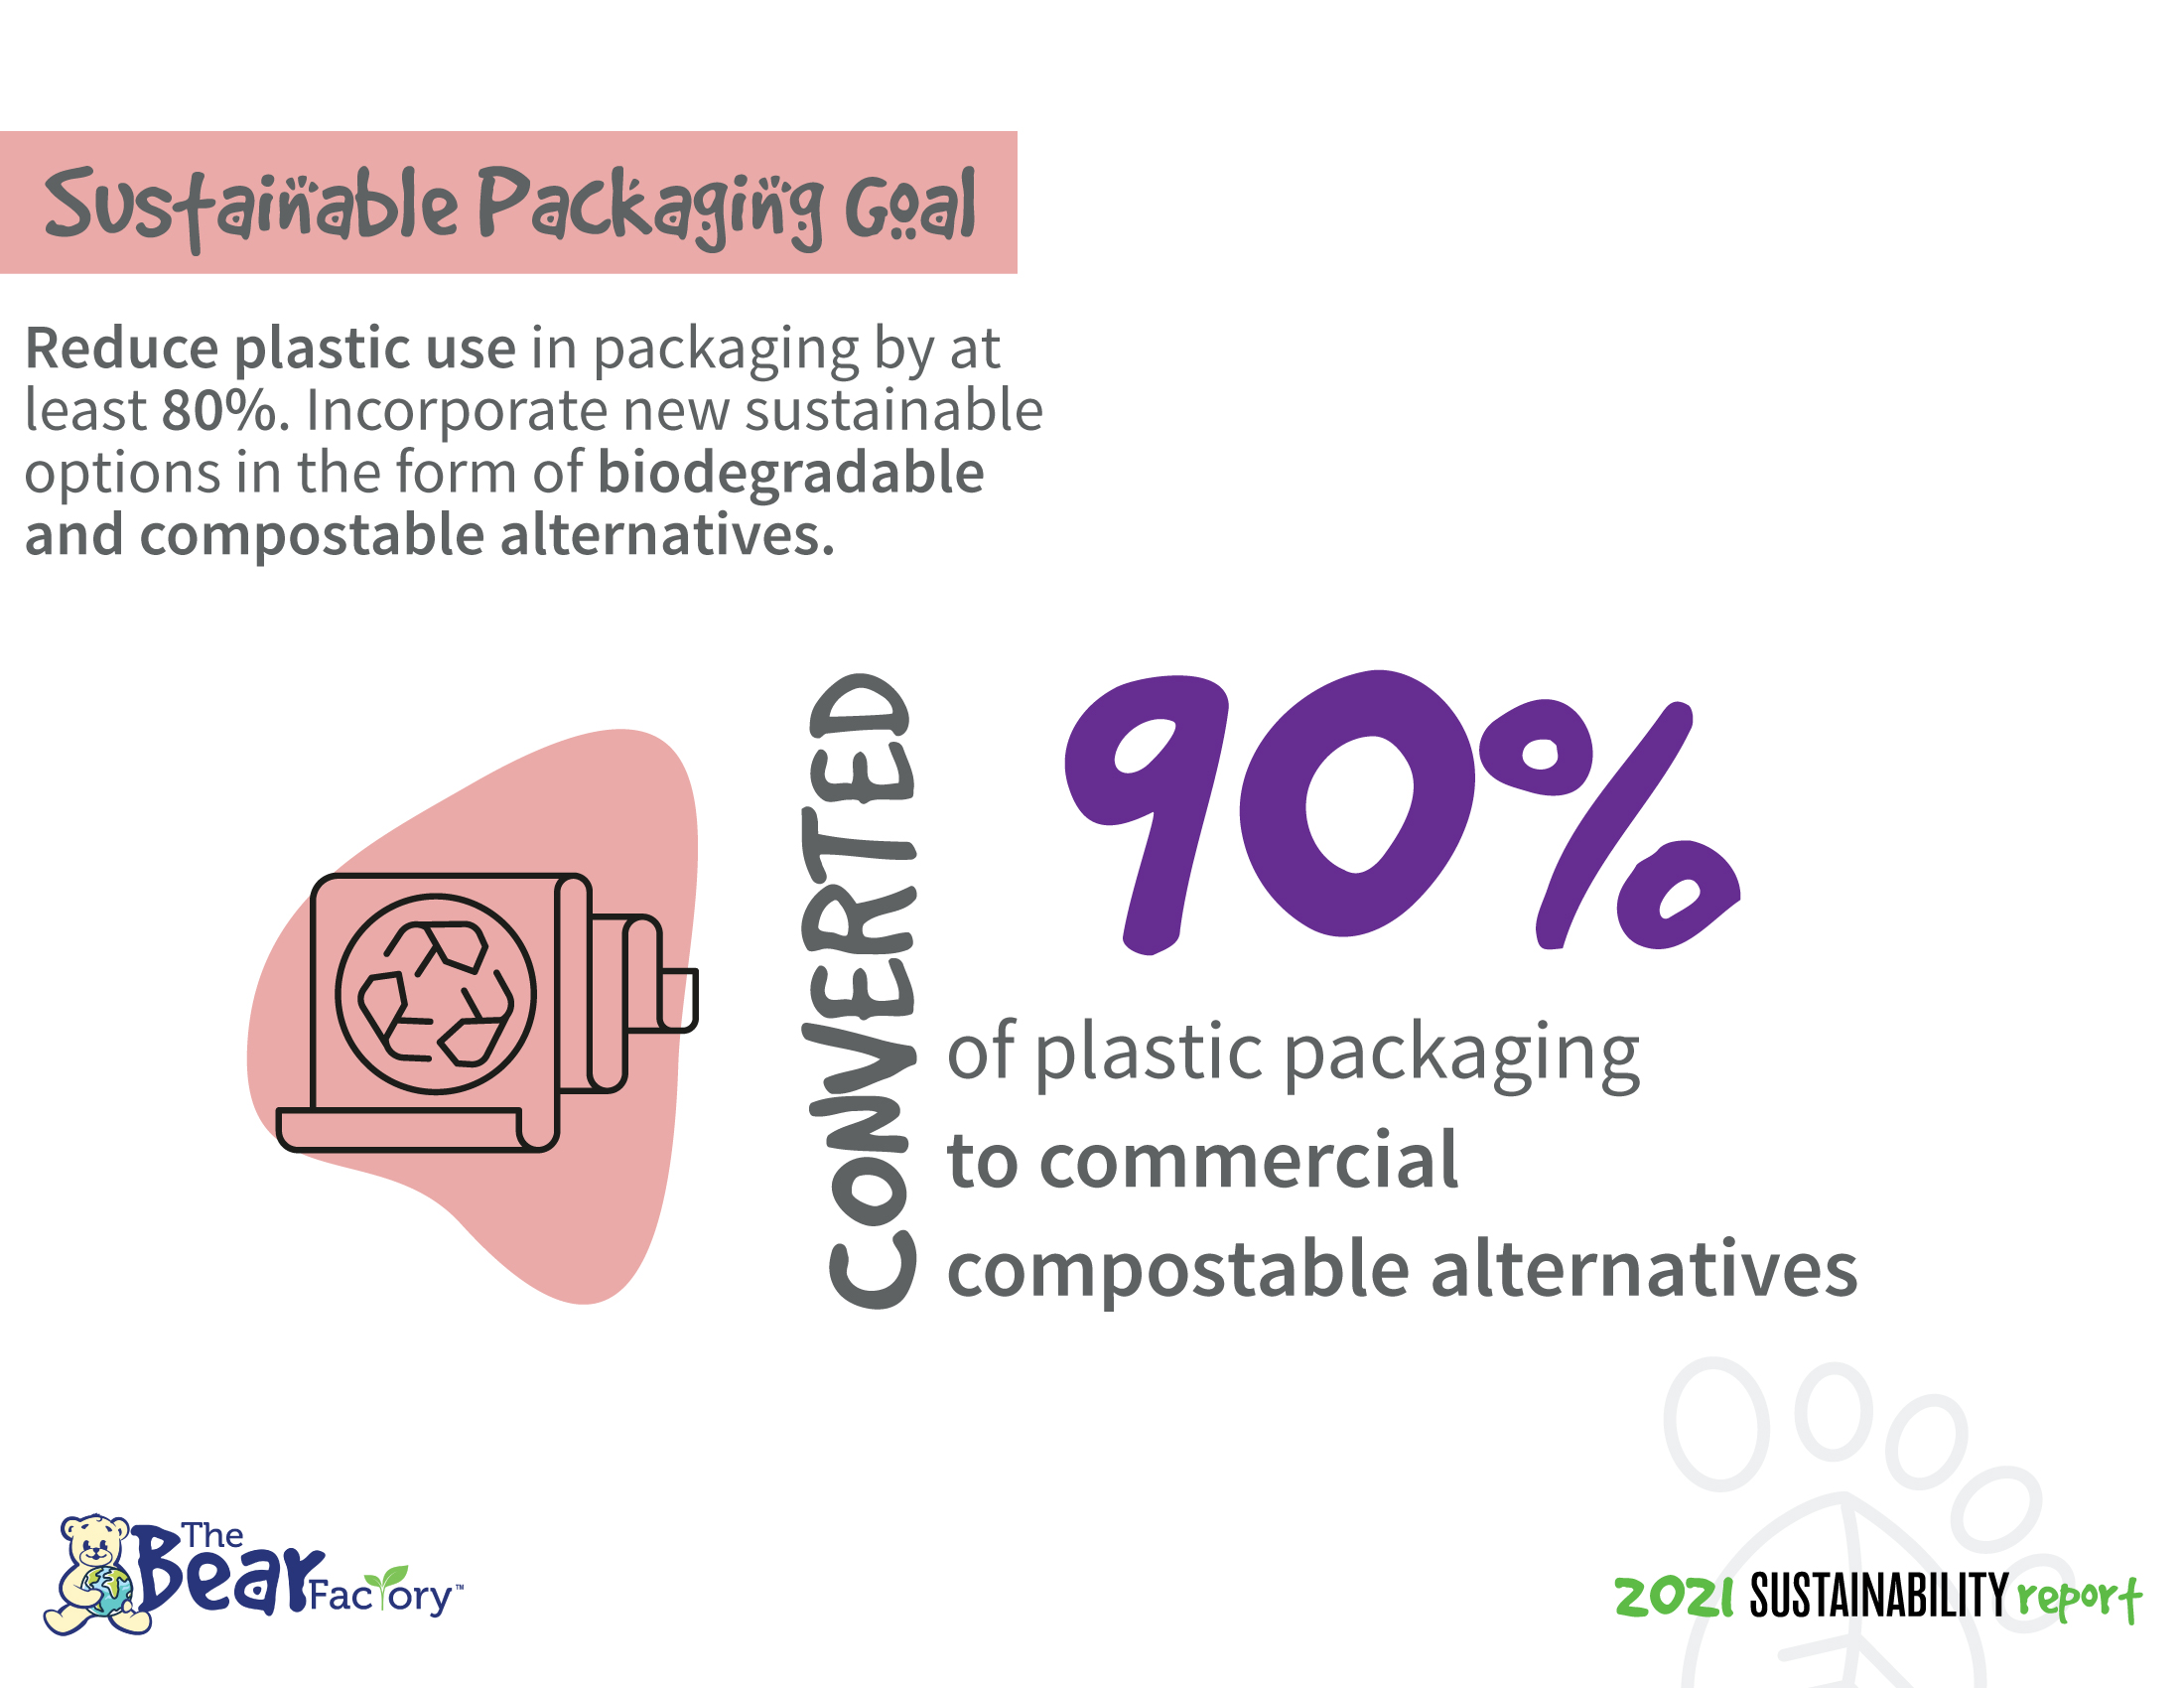 Sustainable Packaging Goal Reduce plastic use in packaging by at least 80%. Incorporate new sustainable options in the form of biodegradable and compostable alternatives.90% of plastic packaging to commercial compostable alternatives